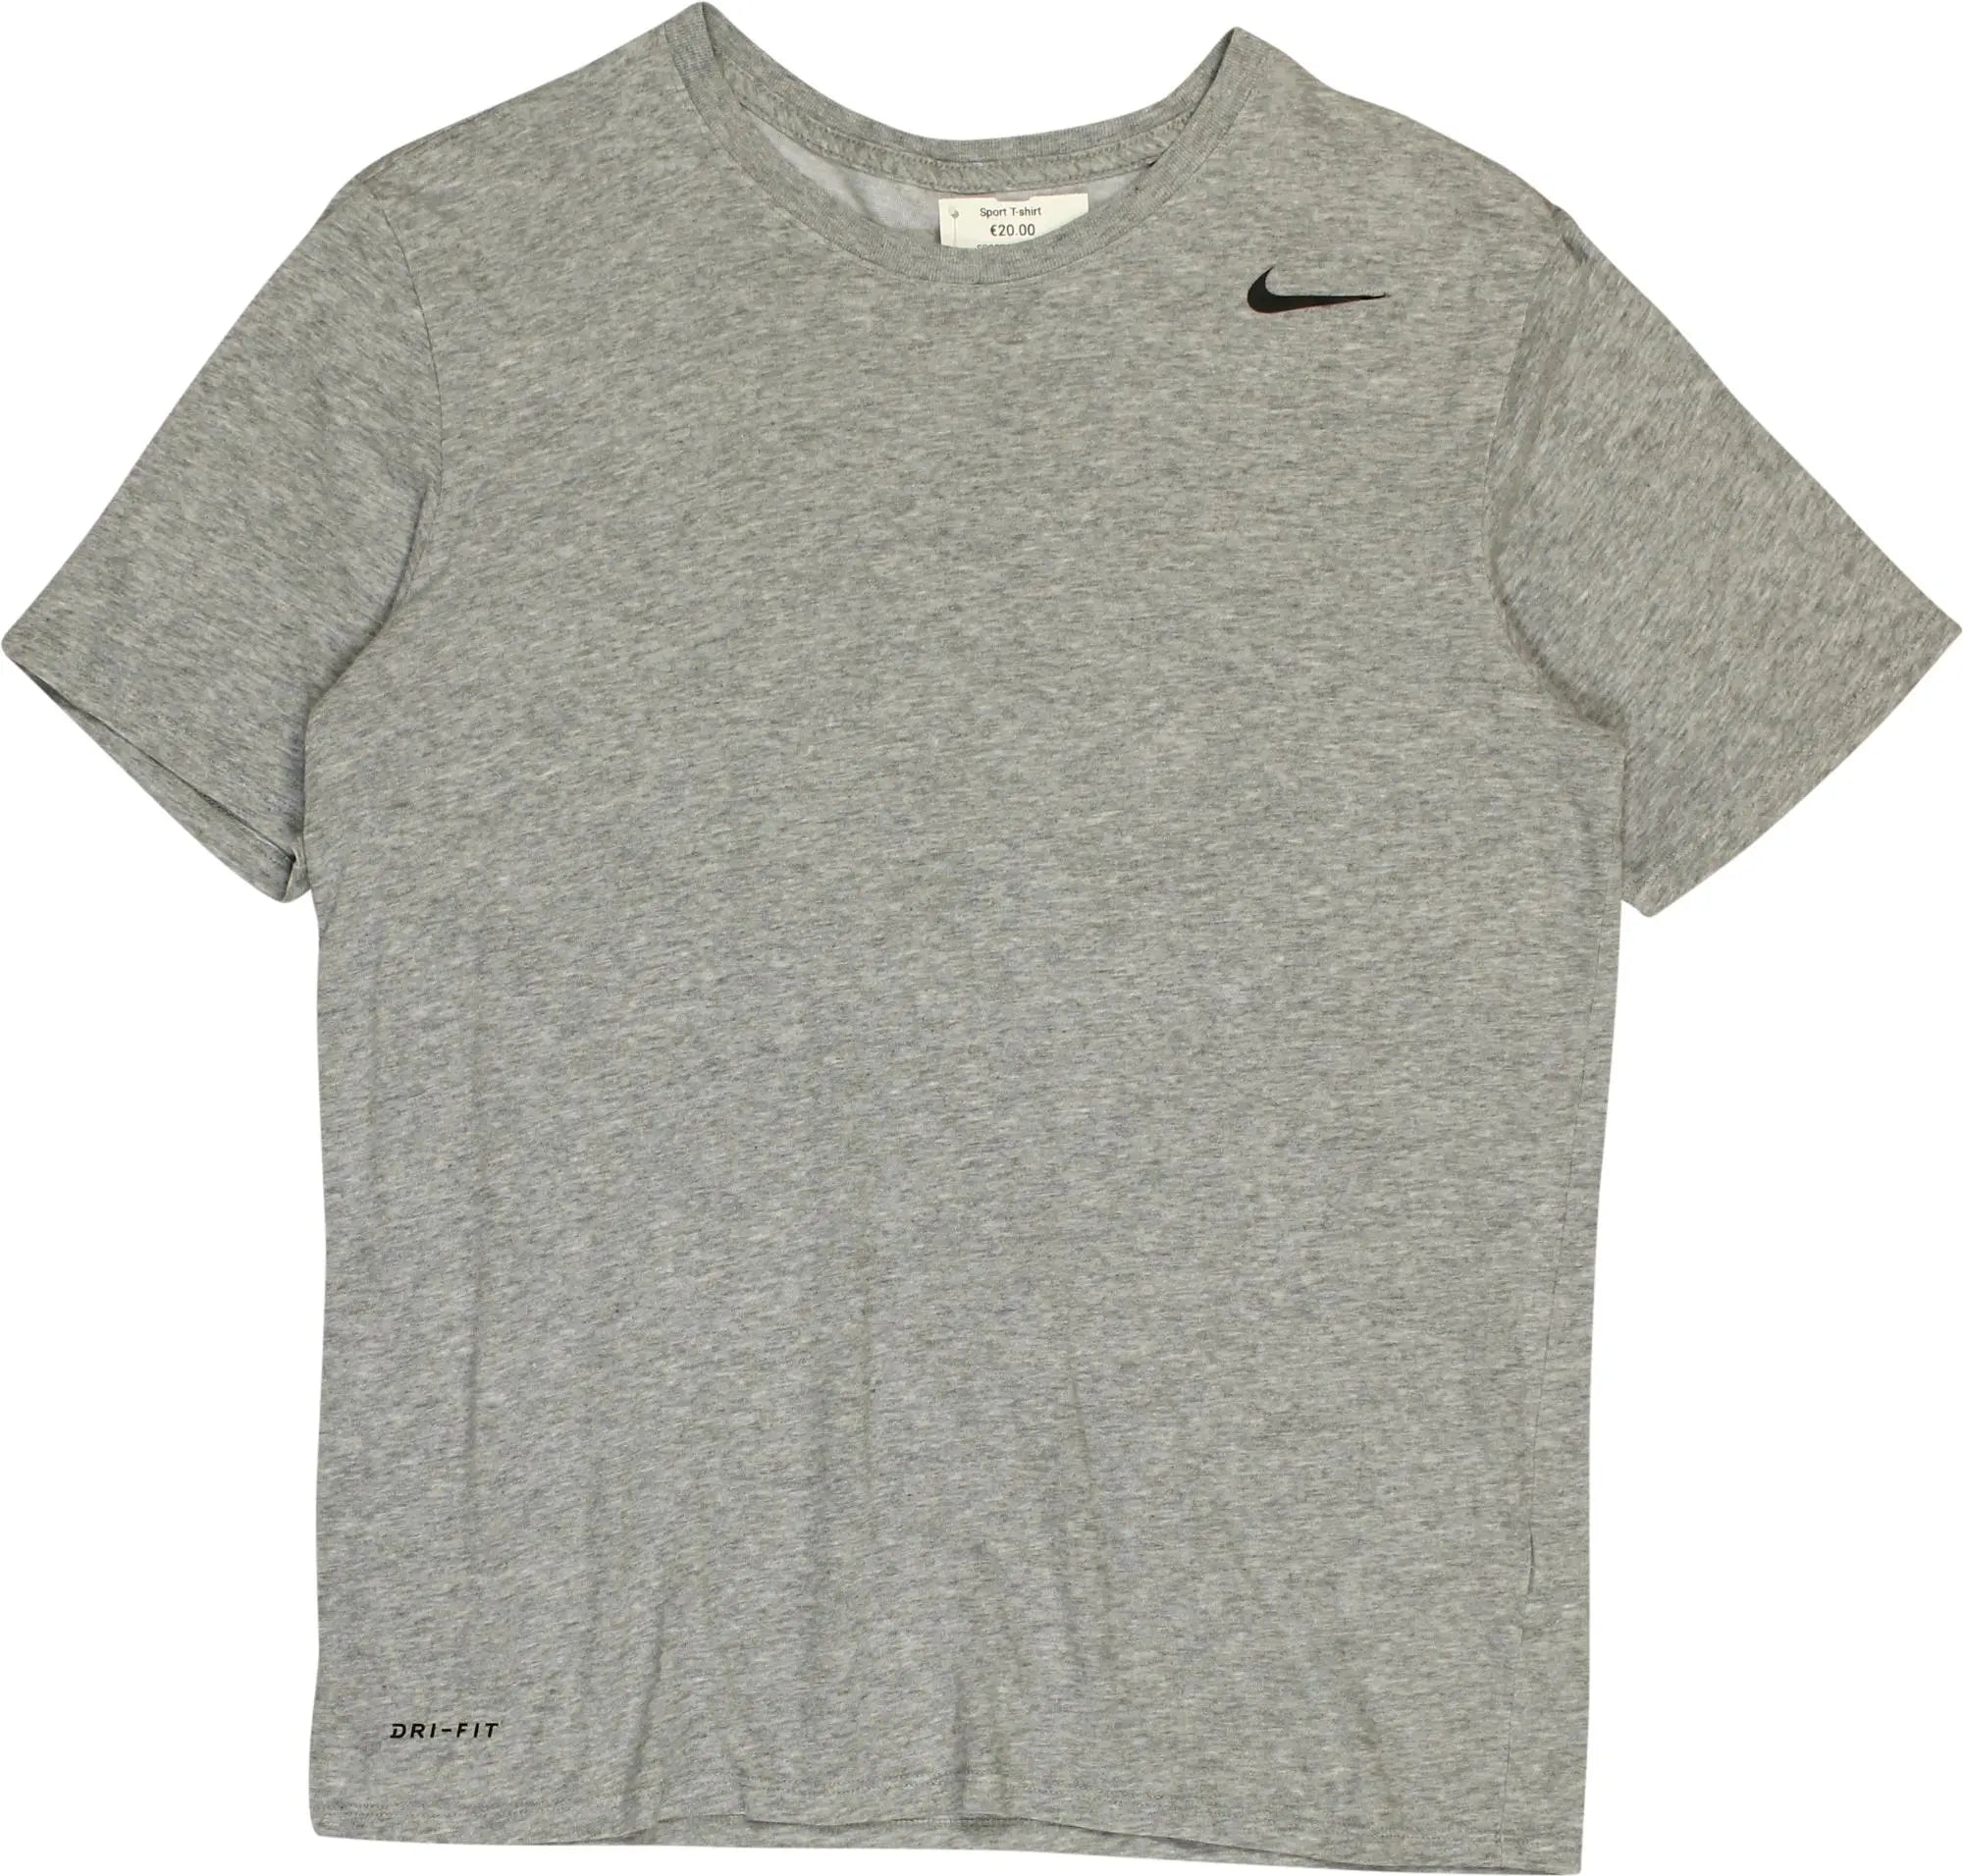 Nike - Sport T-shirt- ThriftTale.com - Vintage and second handclothing